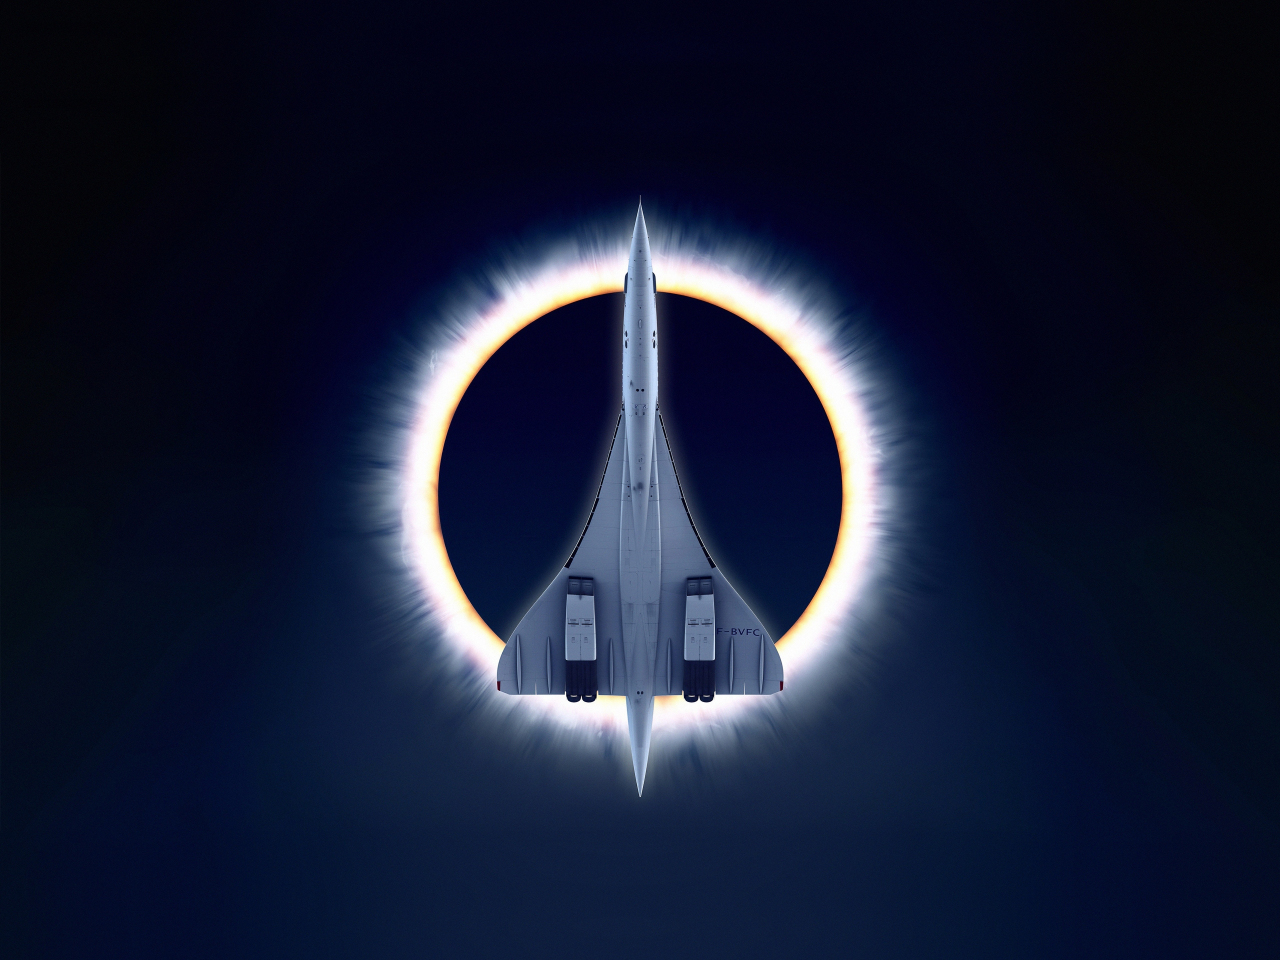 Concorde Carre, eclipse, airplane, moon, aircraft, 1280x960 wallpaper